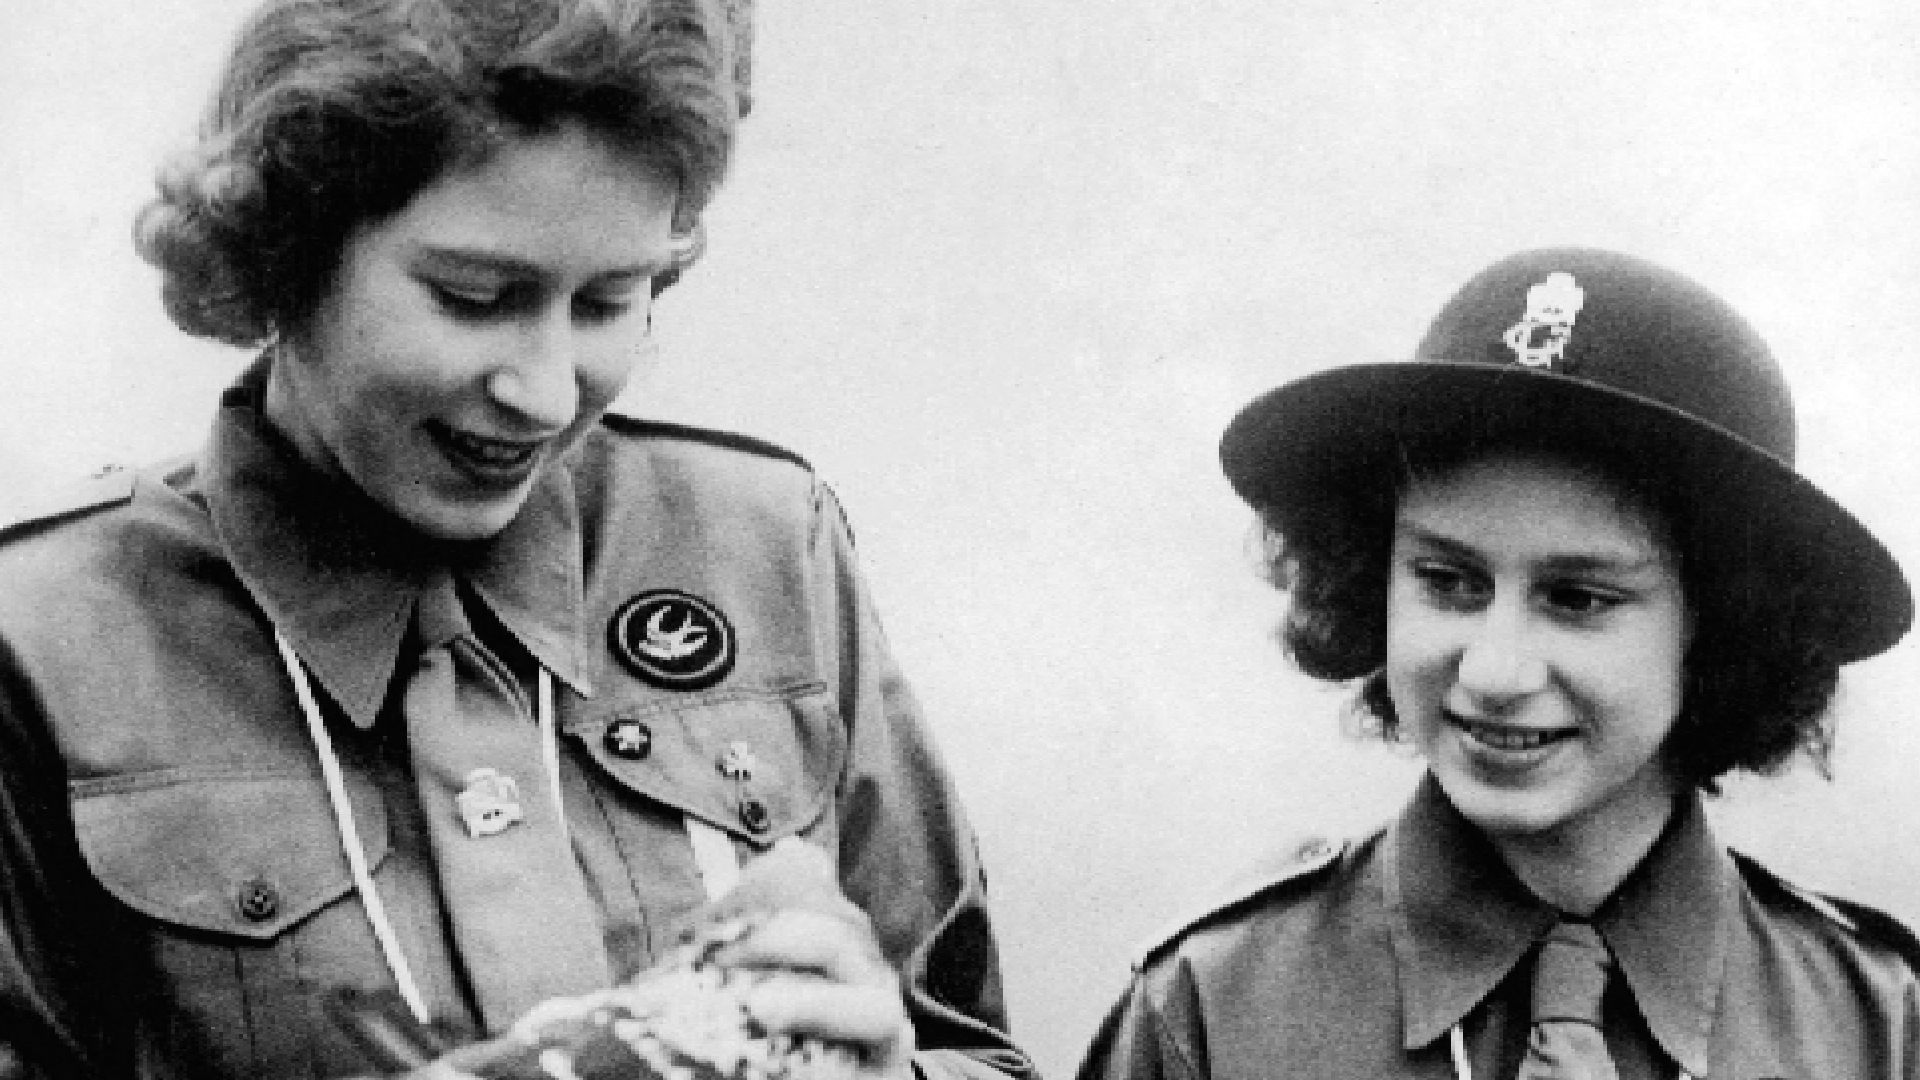 <p>                     Queen Elizabeth had plenty of hobbies growing up, from horse riding to art and music, and was an avid member of the Buckingham Palace Company of Girl Guides. This vintage photograph shows a young Princess Elizabeth in 1943 with her sister, Princess Margaret, holding a pigeon before sending it away with a message. Queen Elizabeth II was a patron of a number of different pigeon racing societies, including the Royal Pigeon Racing Association and the National Flying Club.                   </p>